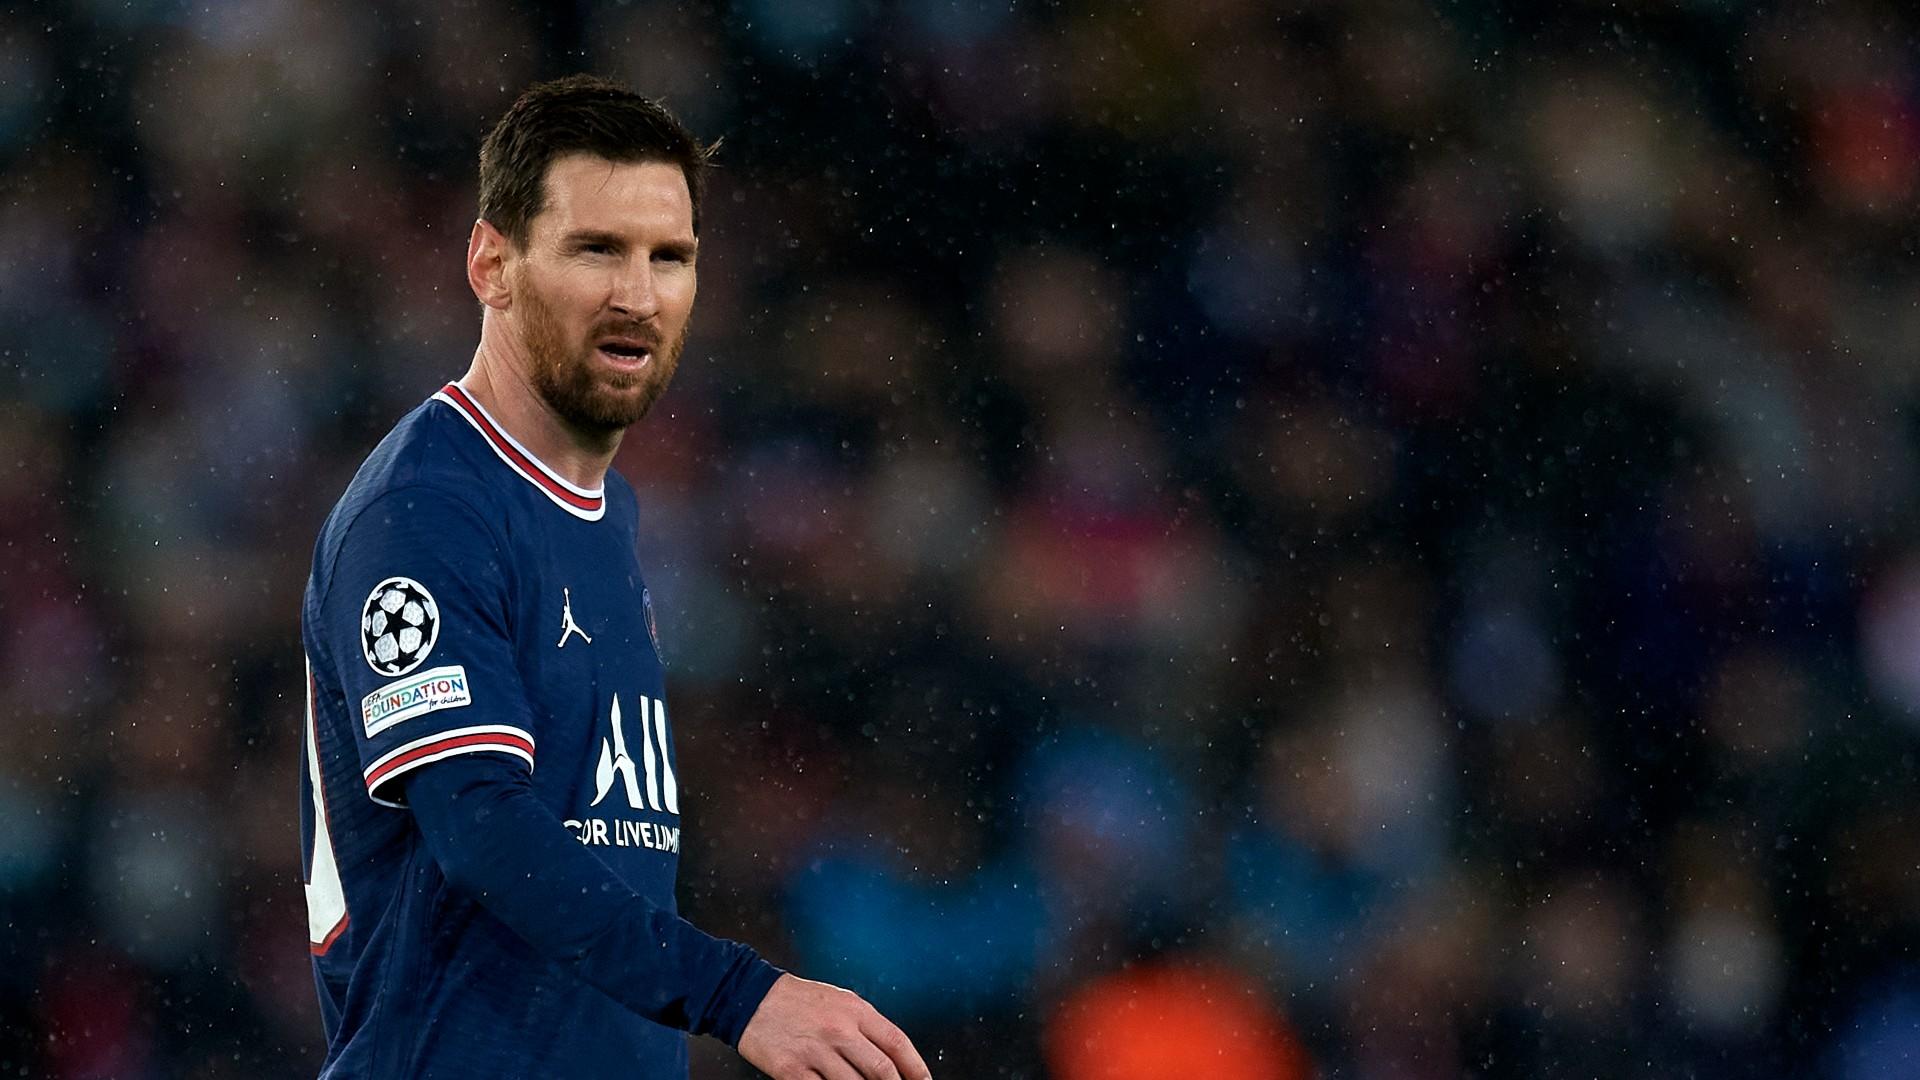 Is Lionel Messi leaving PSG? Latest update on star's contract and rumored Barcelona return